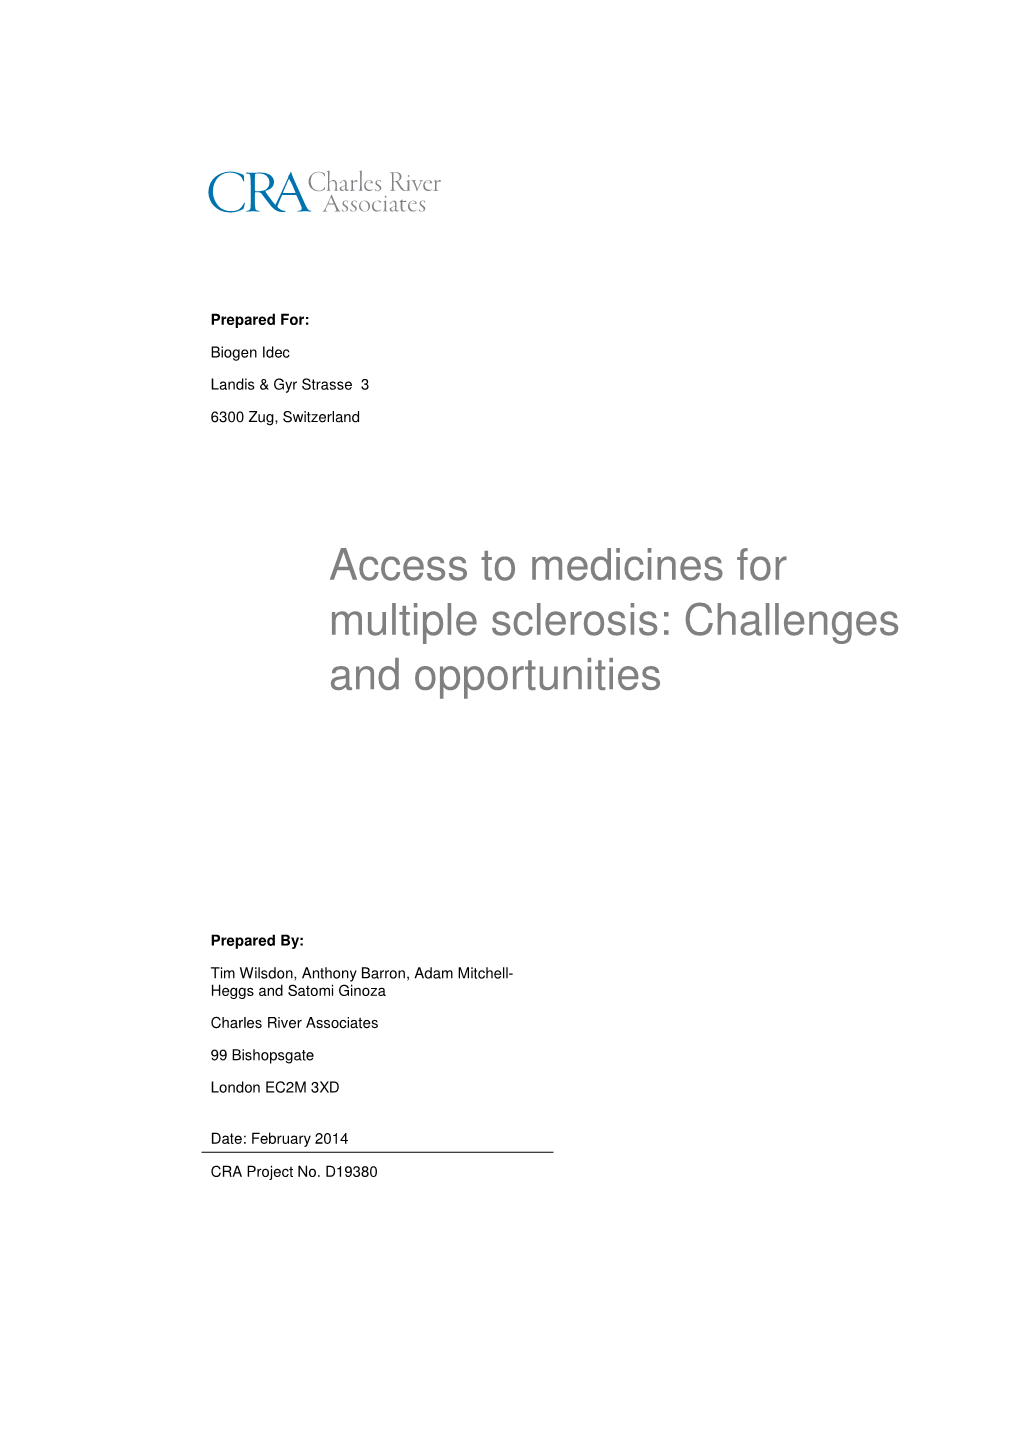 Access to Medicines for Multiple Sclerosis: Challenges and Opportunities